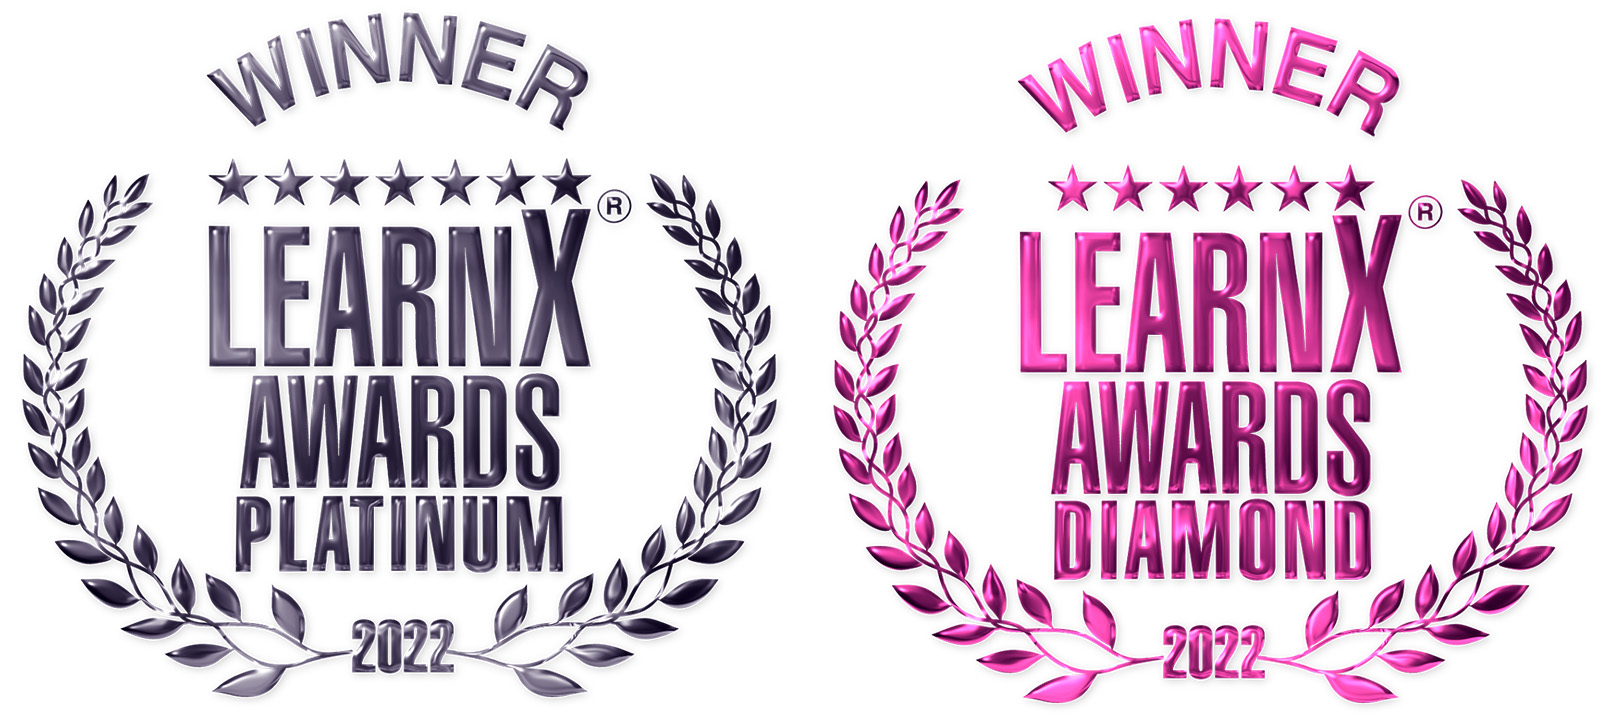 Graphics of the 2022 LearnX awards, showing wreaths around text with seven stars for the platinum award and six stars for the diamond award.